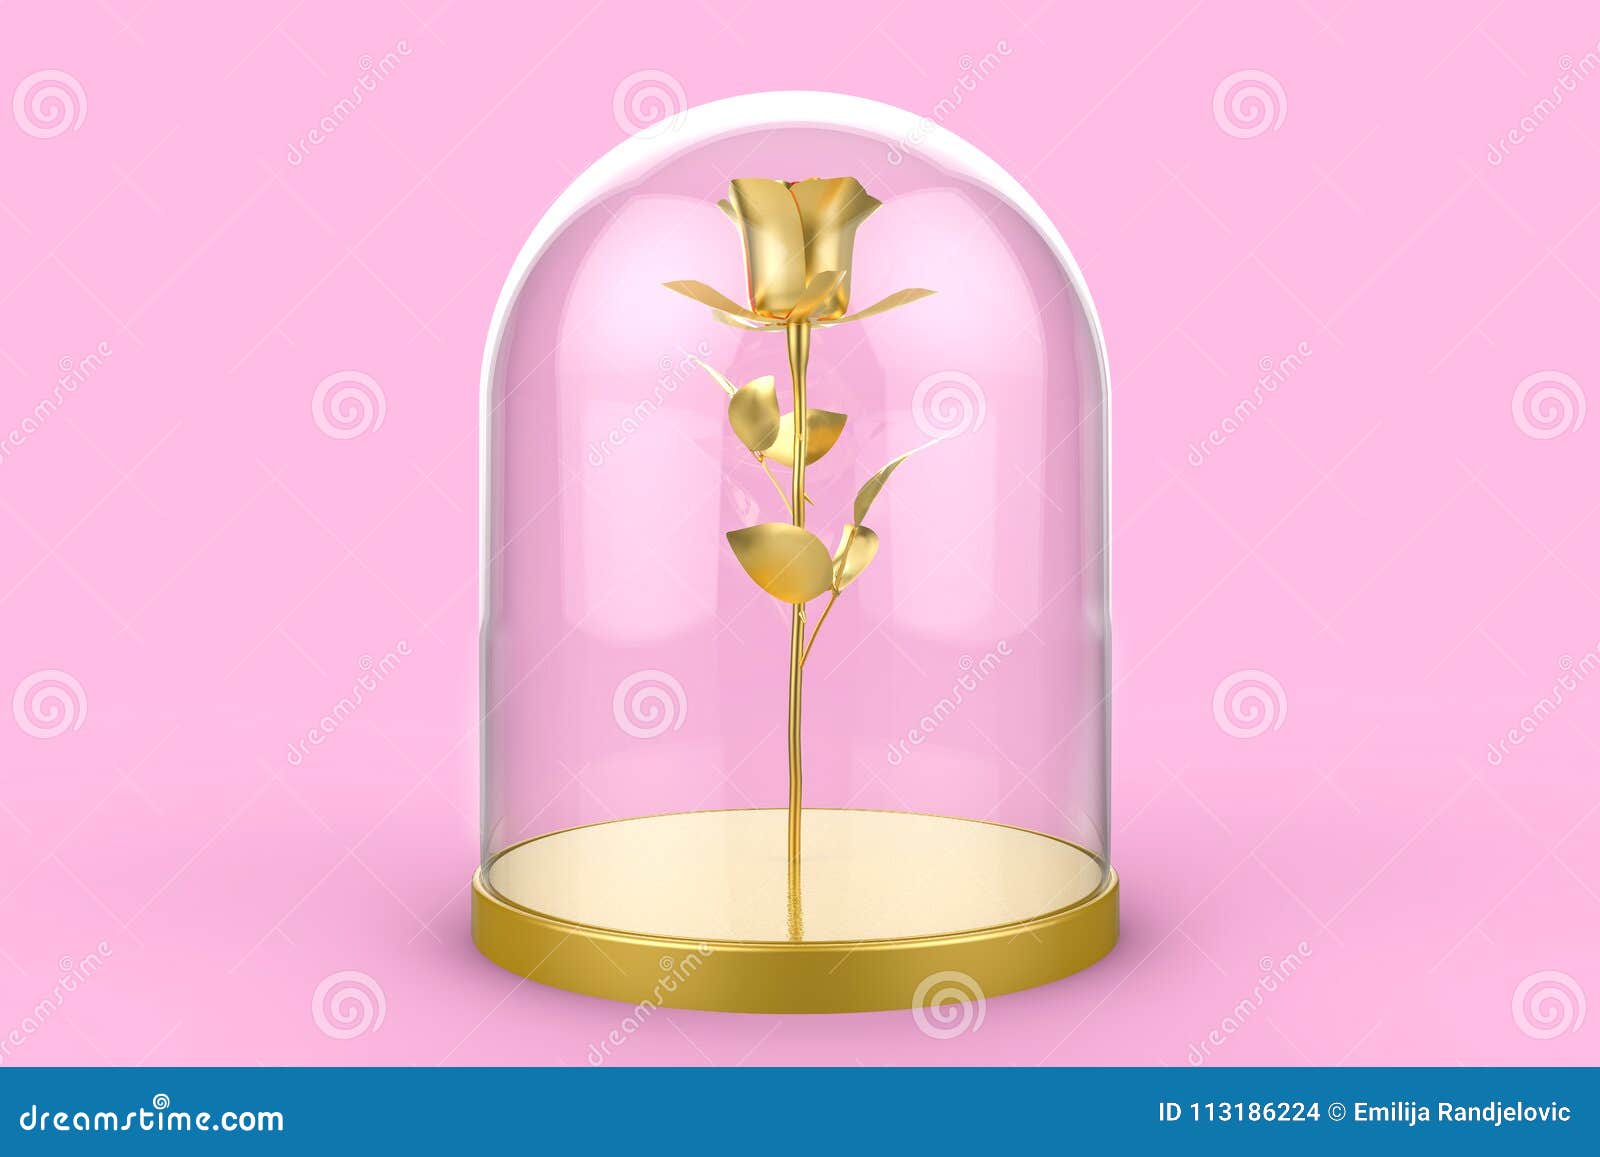 24k golden rose under glass dome - beauty and the beast concept 3d 